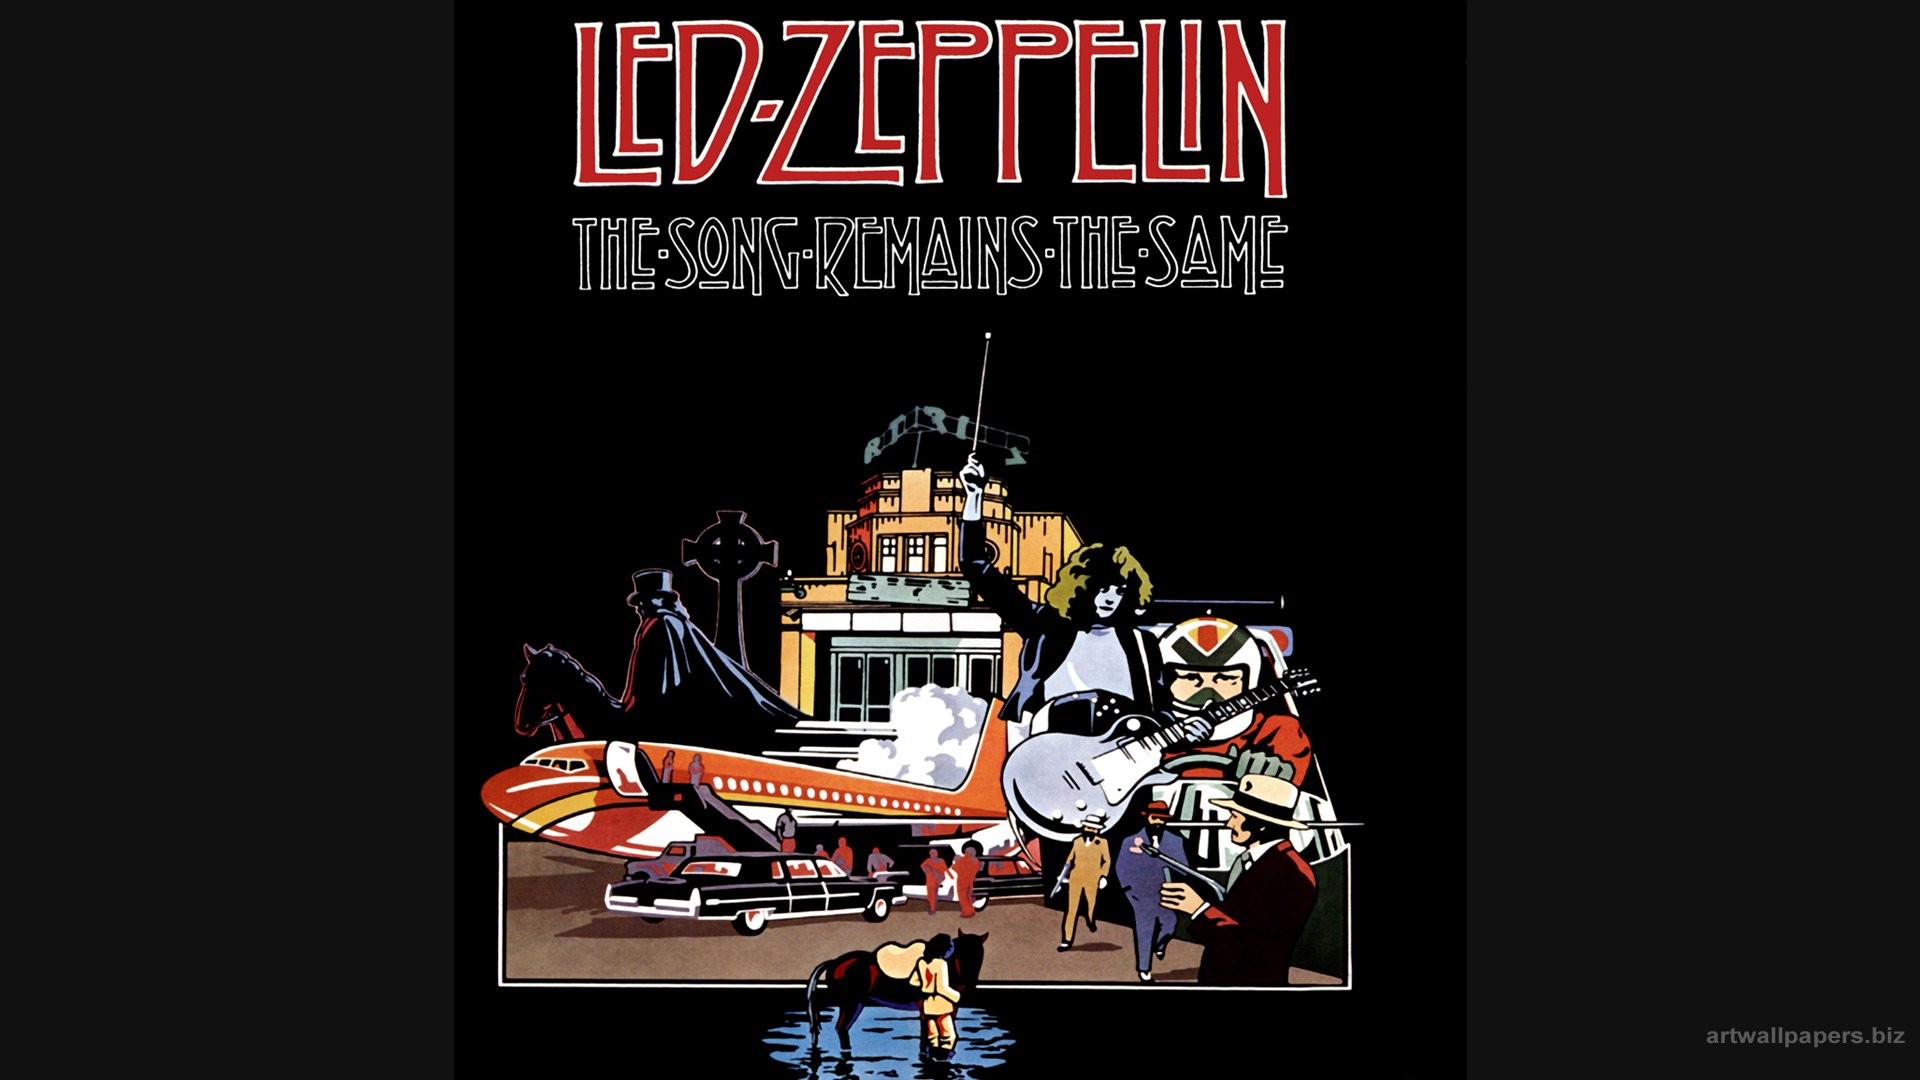 1920x1080 Led Zeppelin The Song Remains Same